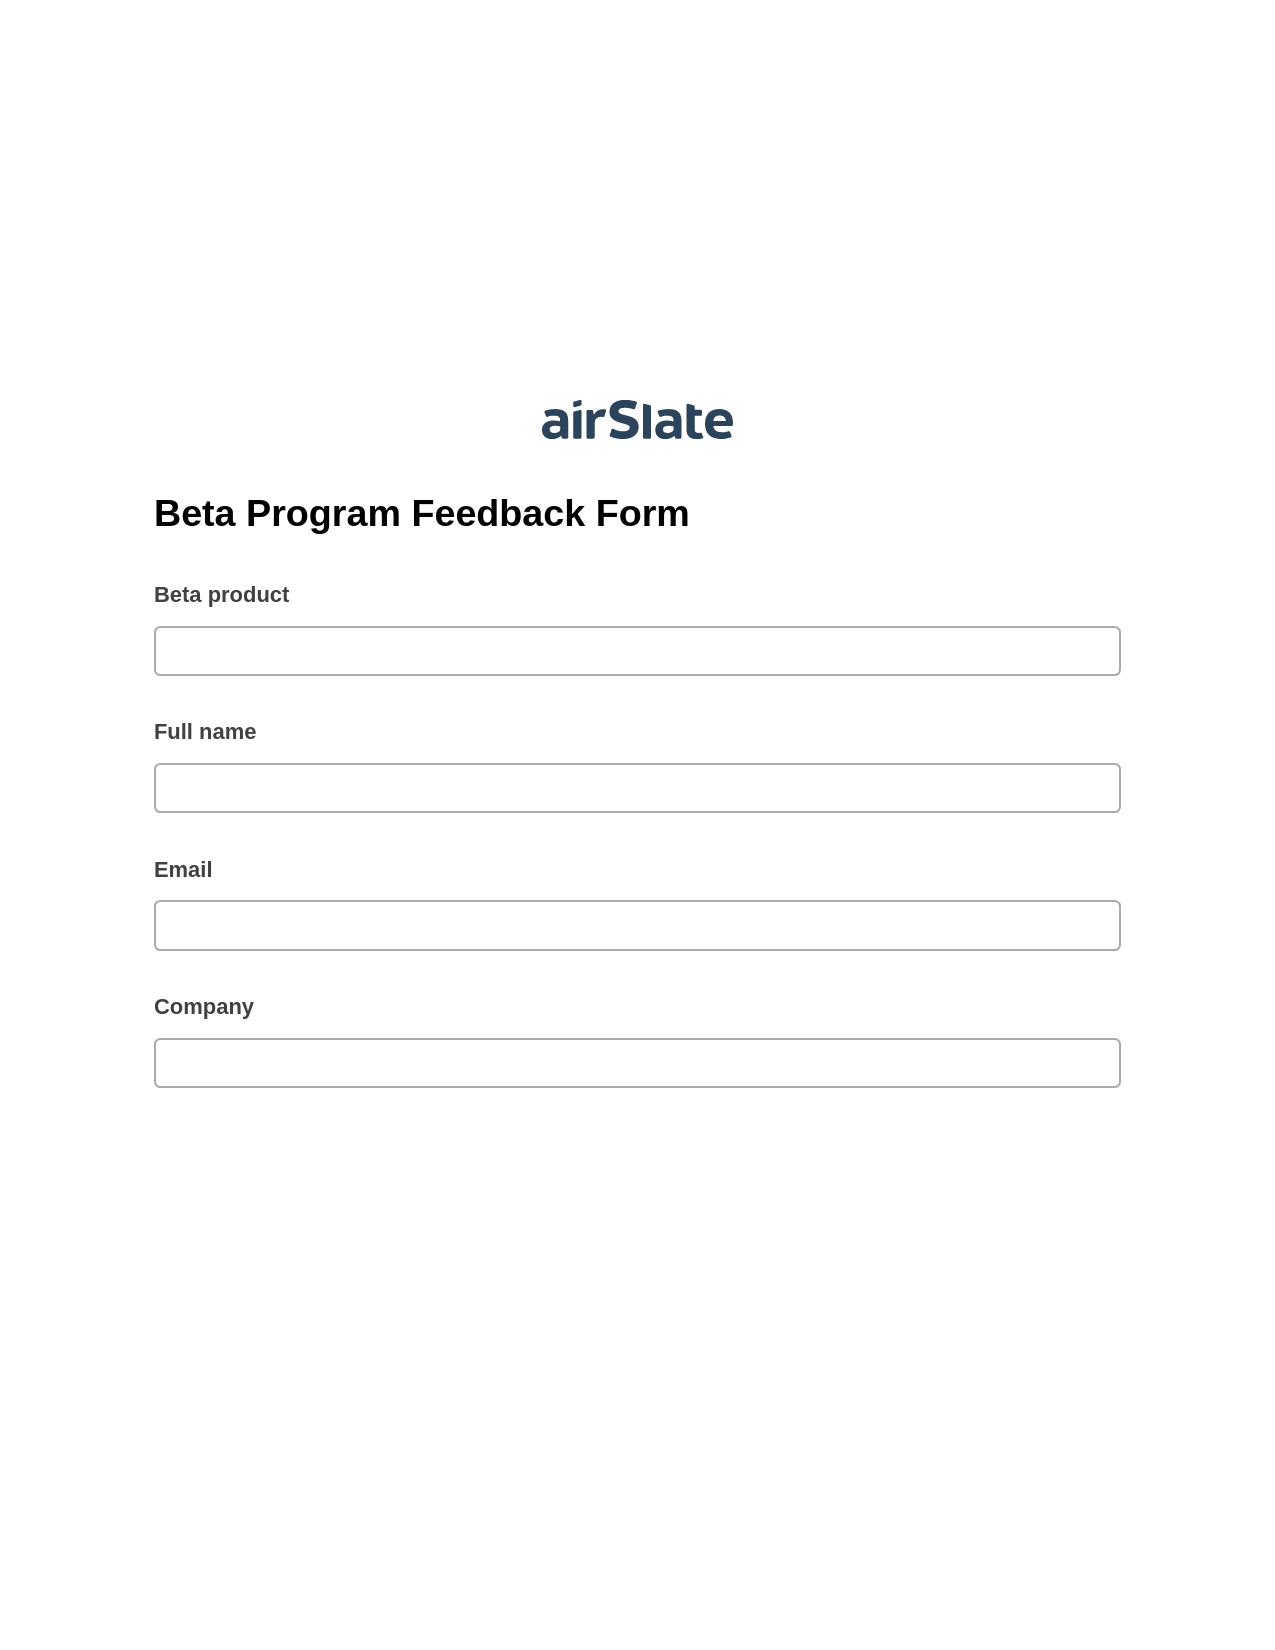 Multirole Beta Program Feedback Form Pre-fill from Excel Spreadsheet Bot, Update Salesforce Record Bot, Export to Salesforce Bot